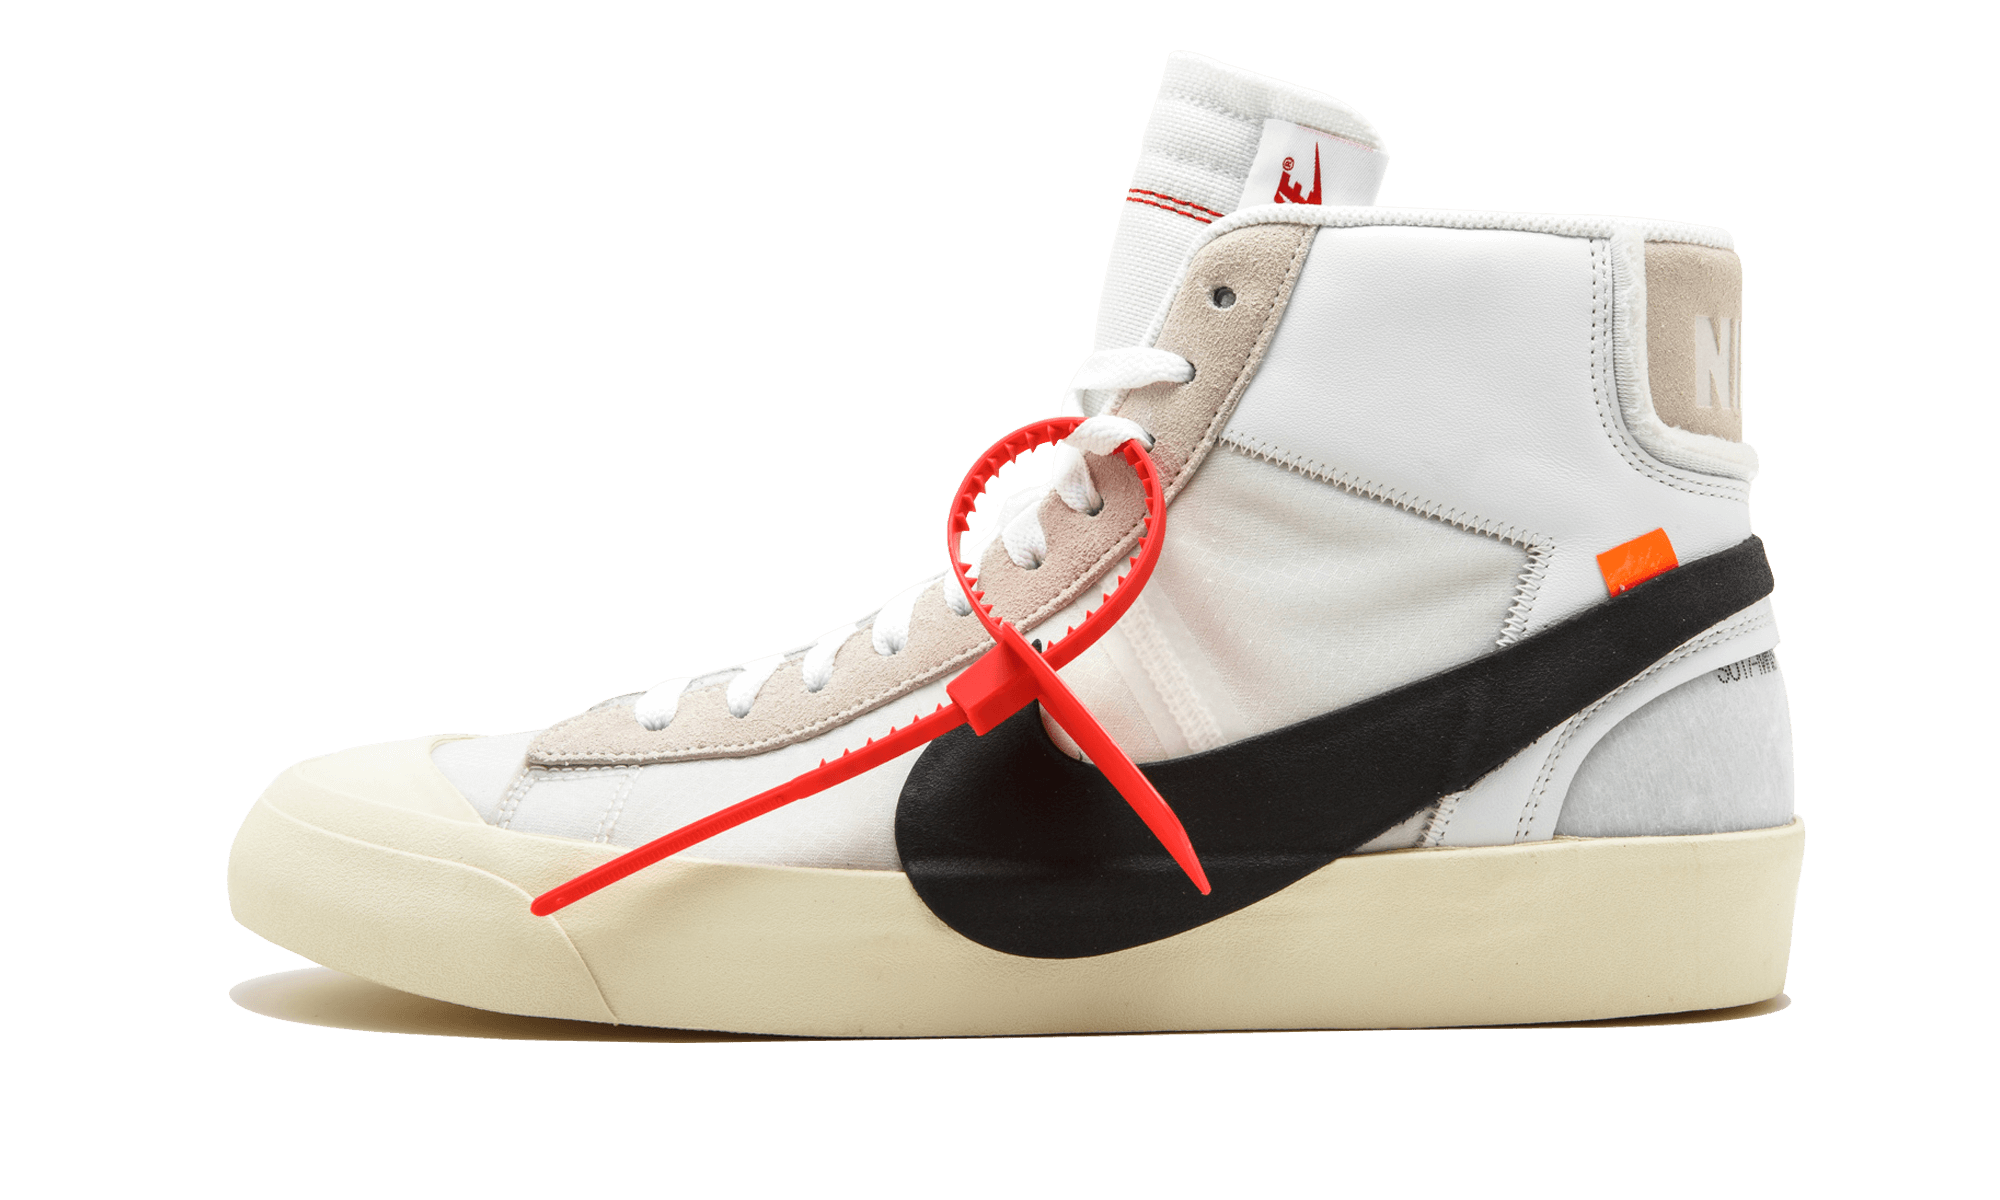 Stadium Goods on Twitter: "The Nike Blazer was popularized by George “The  Iceman” Gervin on-court. By the 1980s, skateboarders saw the design's  grippy sole and durable build as advantages in their favor,